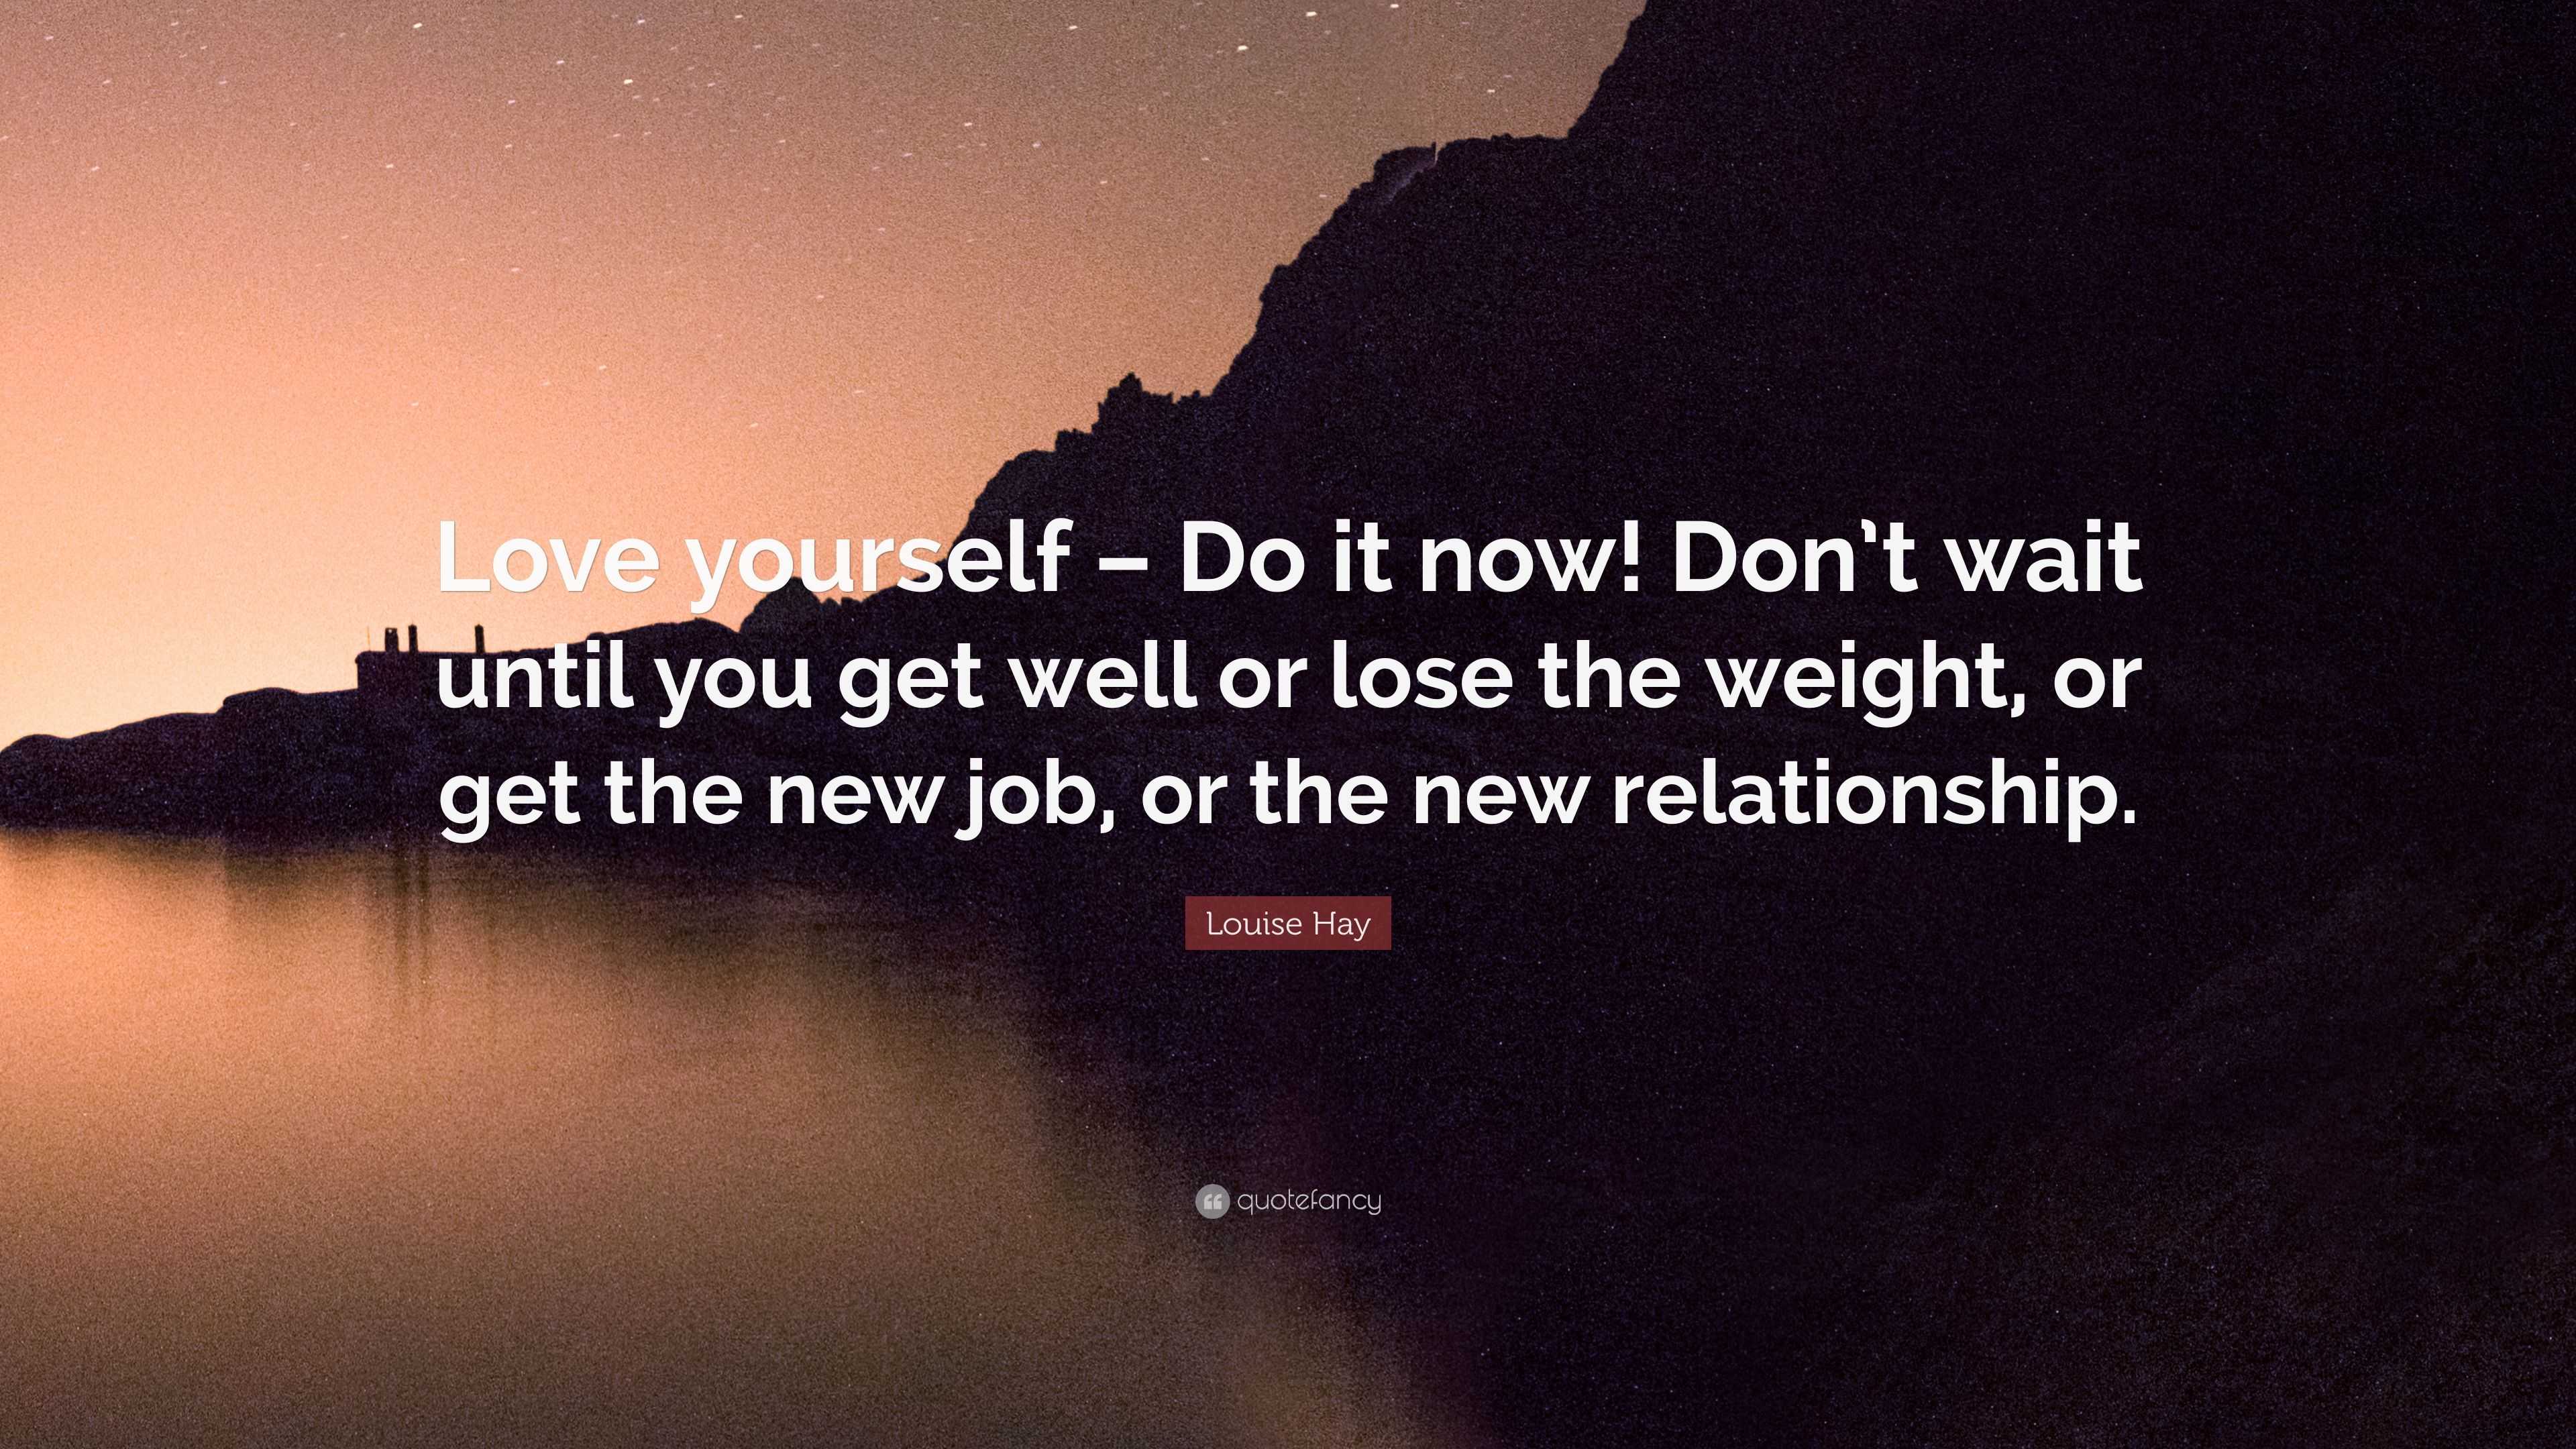 Louise Hay Quote “Love yourself – Do Don t wait